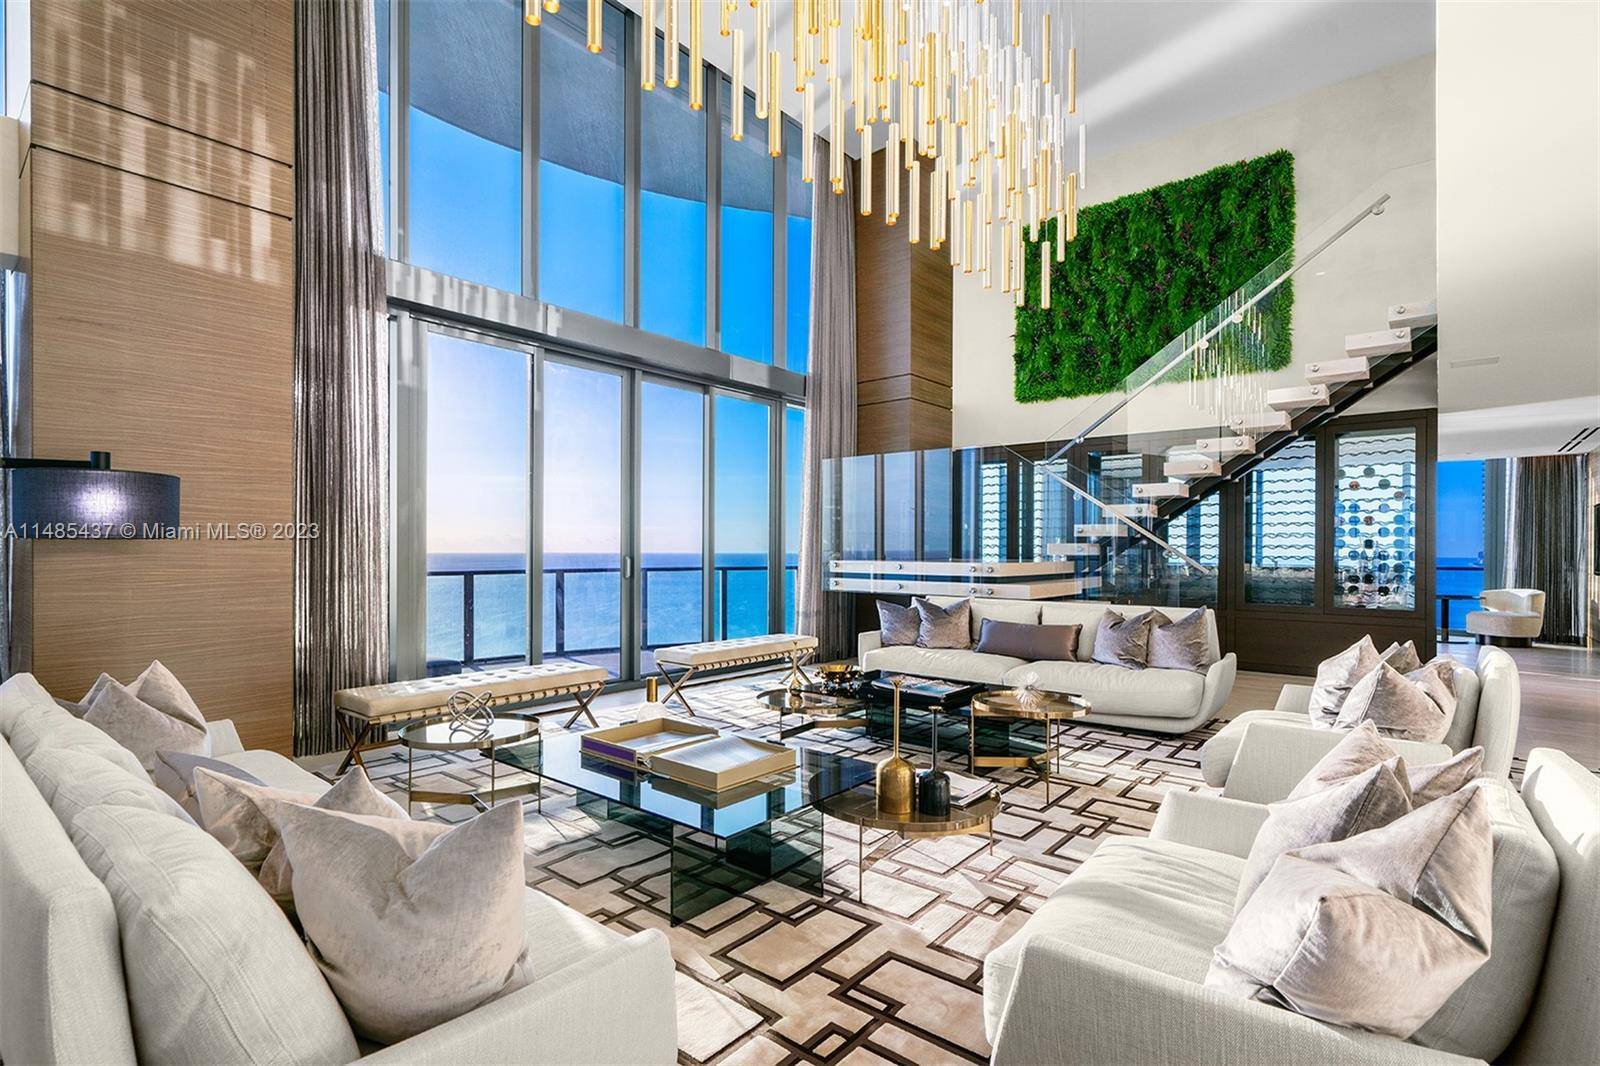 Introducing the Regalia Penthouse, a masterpiece offering limited edition living on the Ocean in Sunny Isles Beach.